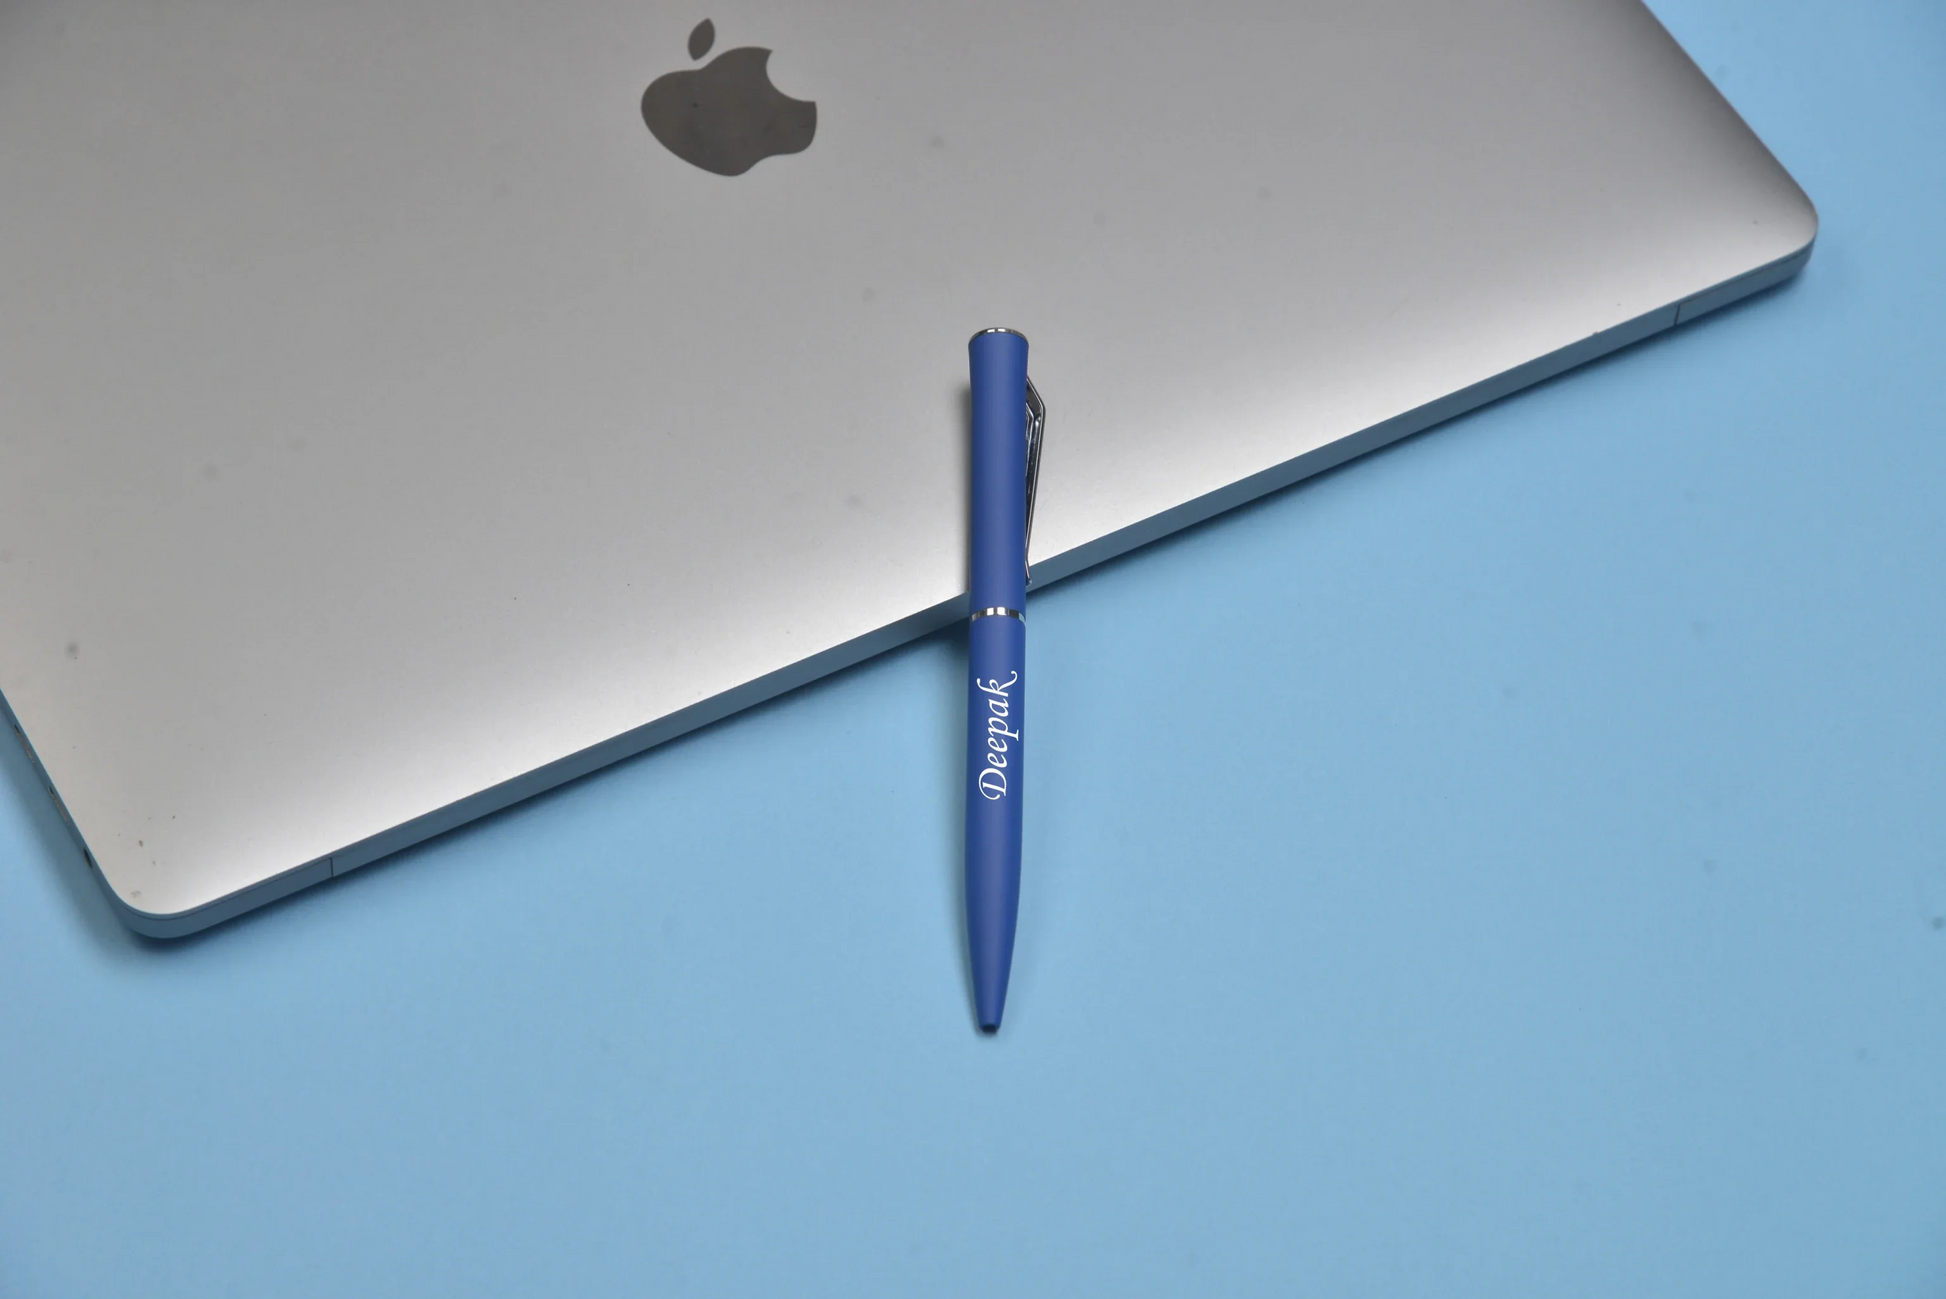 "Write with confidence and precision with our high-quality pen. Ideal for professionals and for signing important documents."